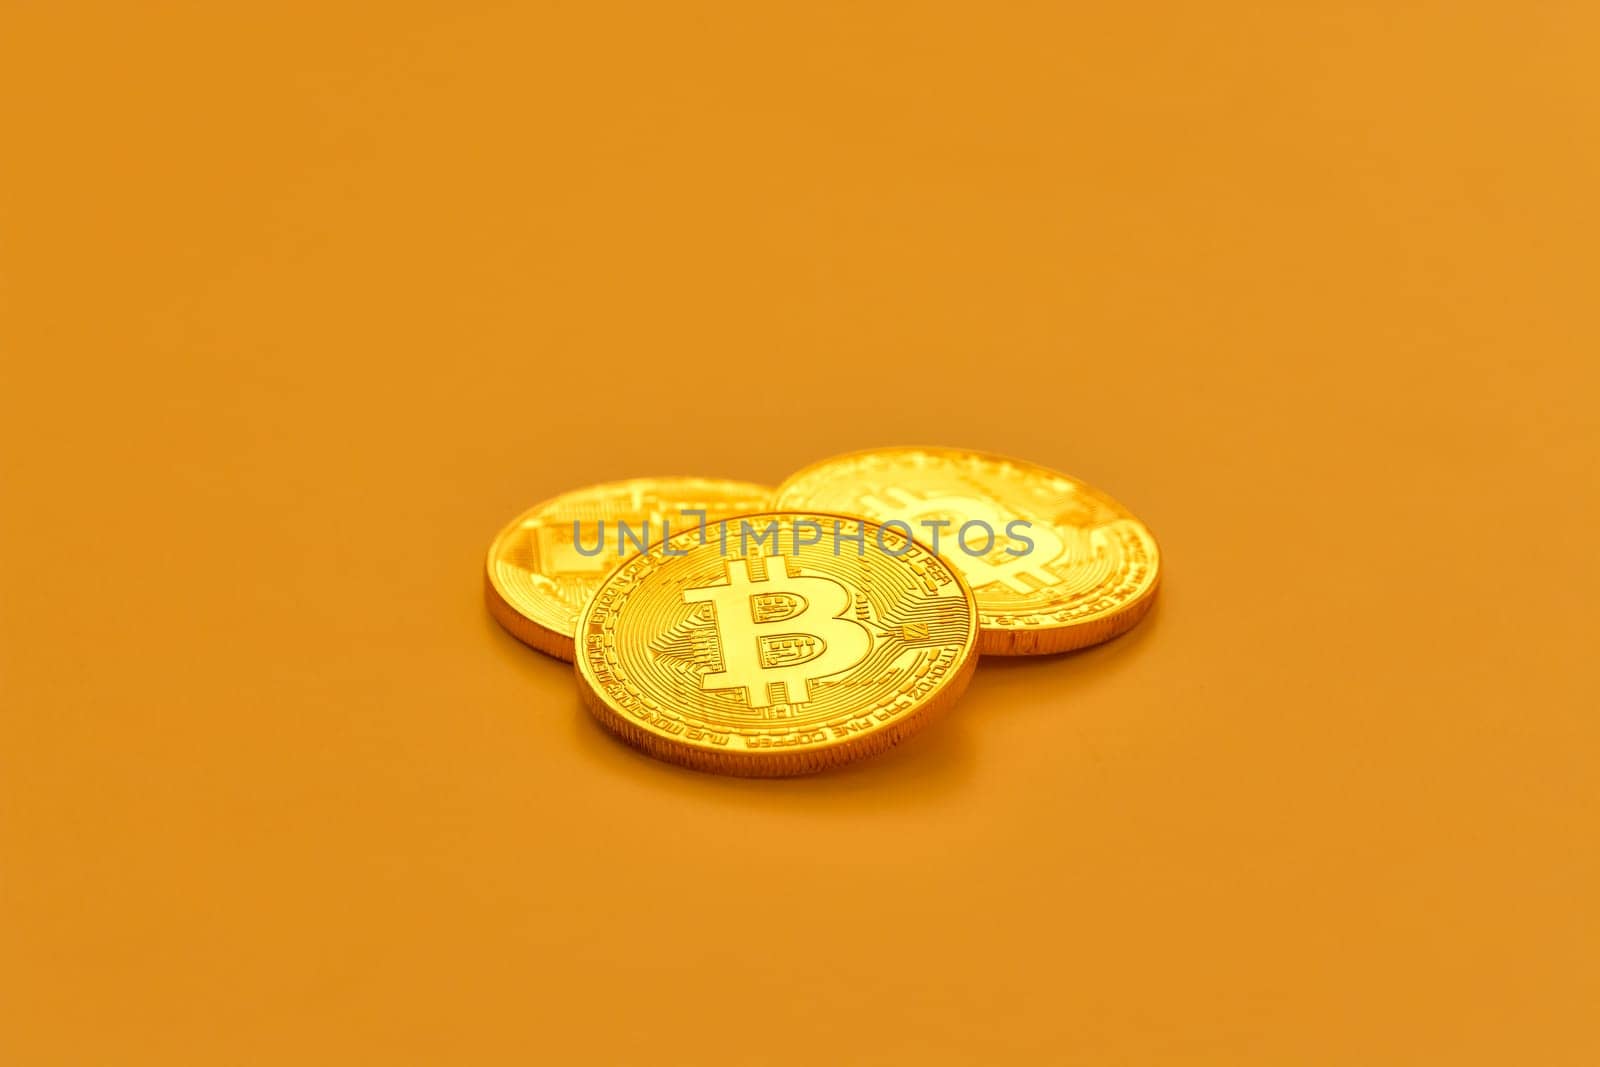 Three yellow bitcoin beans laying on flat surface